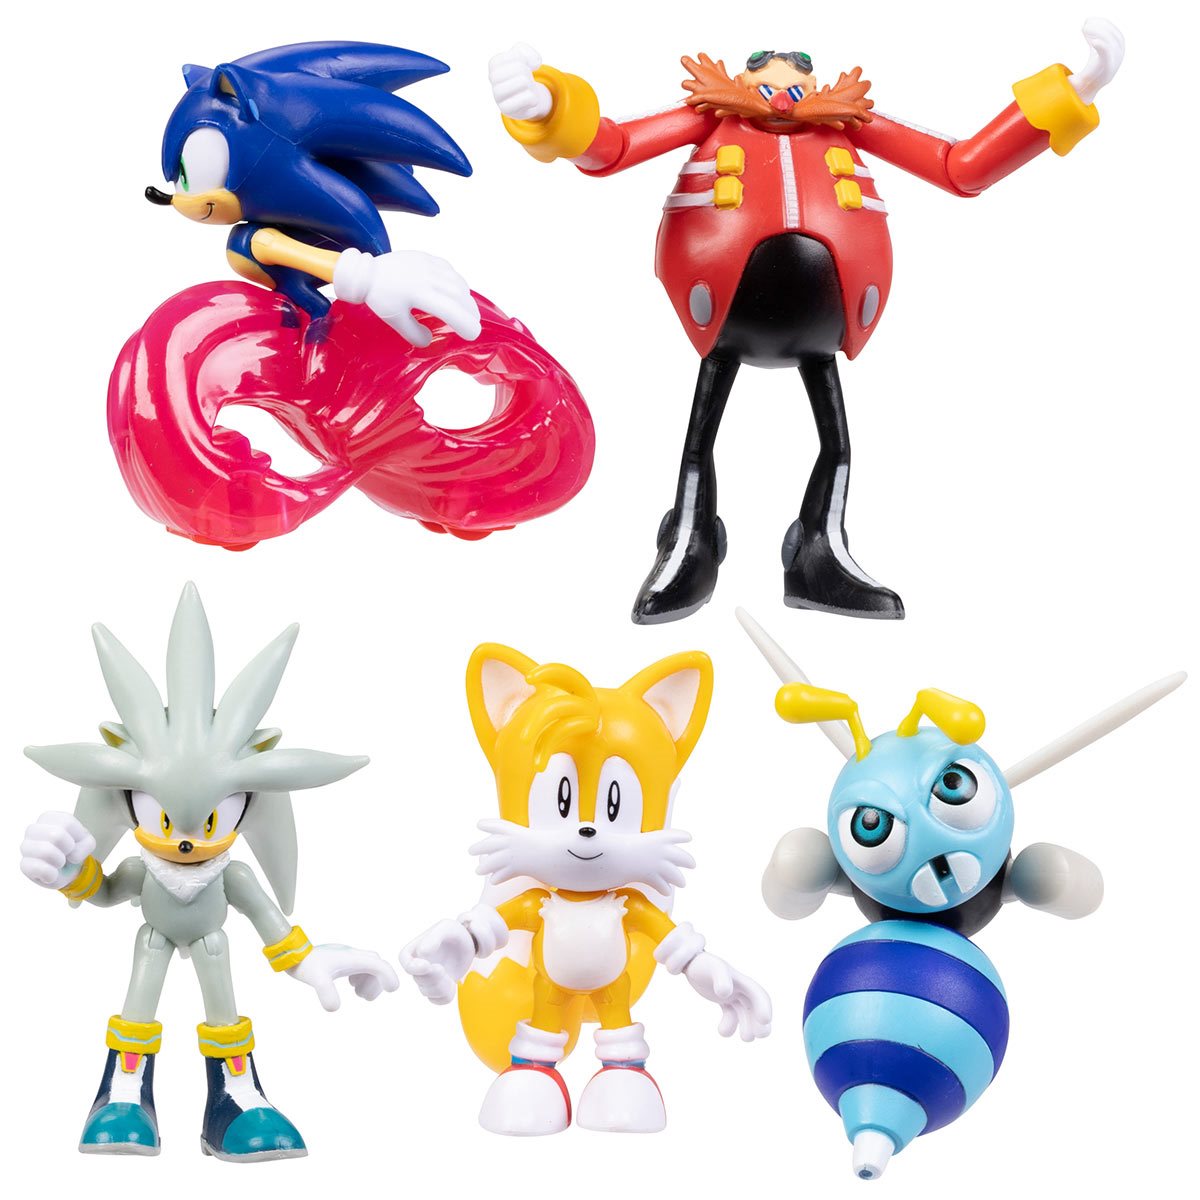 Sonic the Hedgehog Tails 2 1/2 Inch Wave 5 Action Figure – Insert